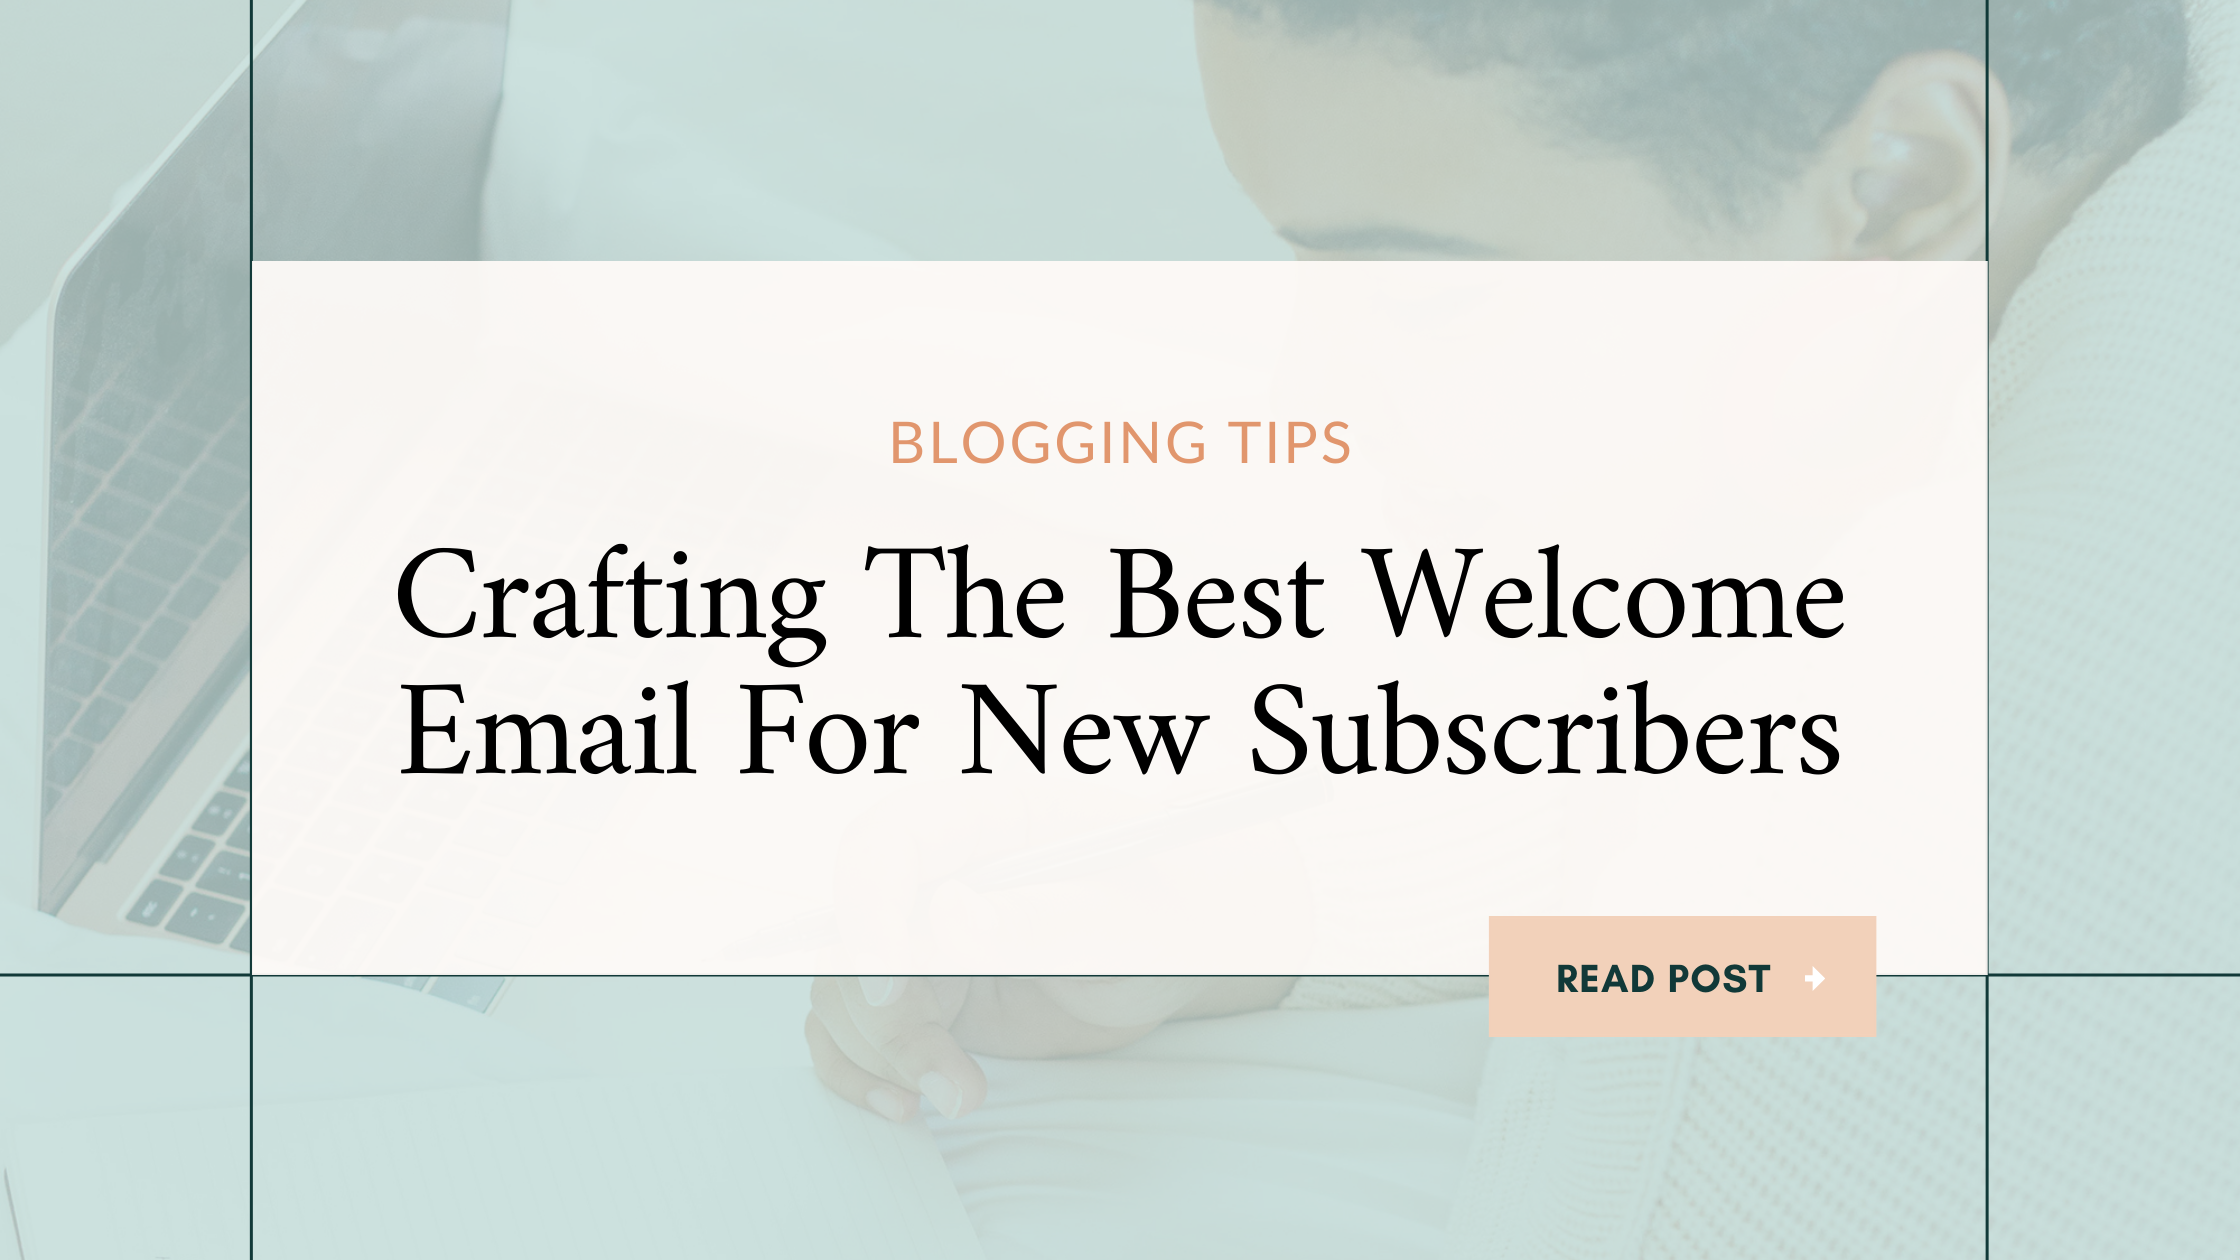 Welcome Email For New Subscribers: What Should You Send?